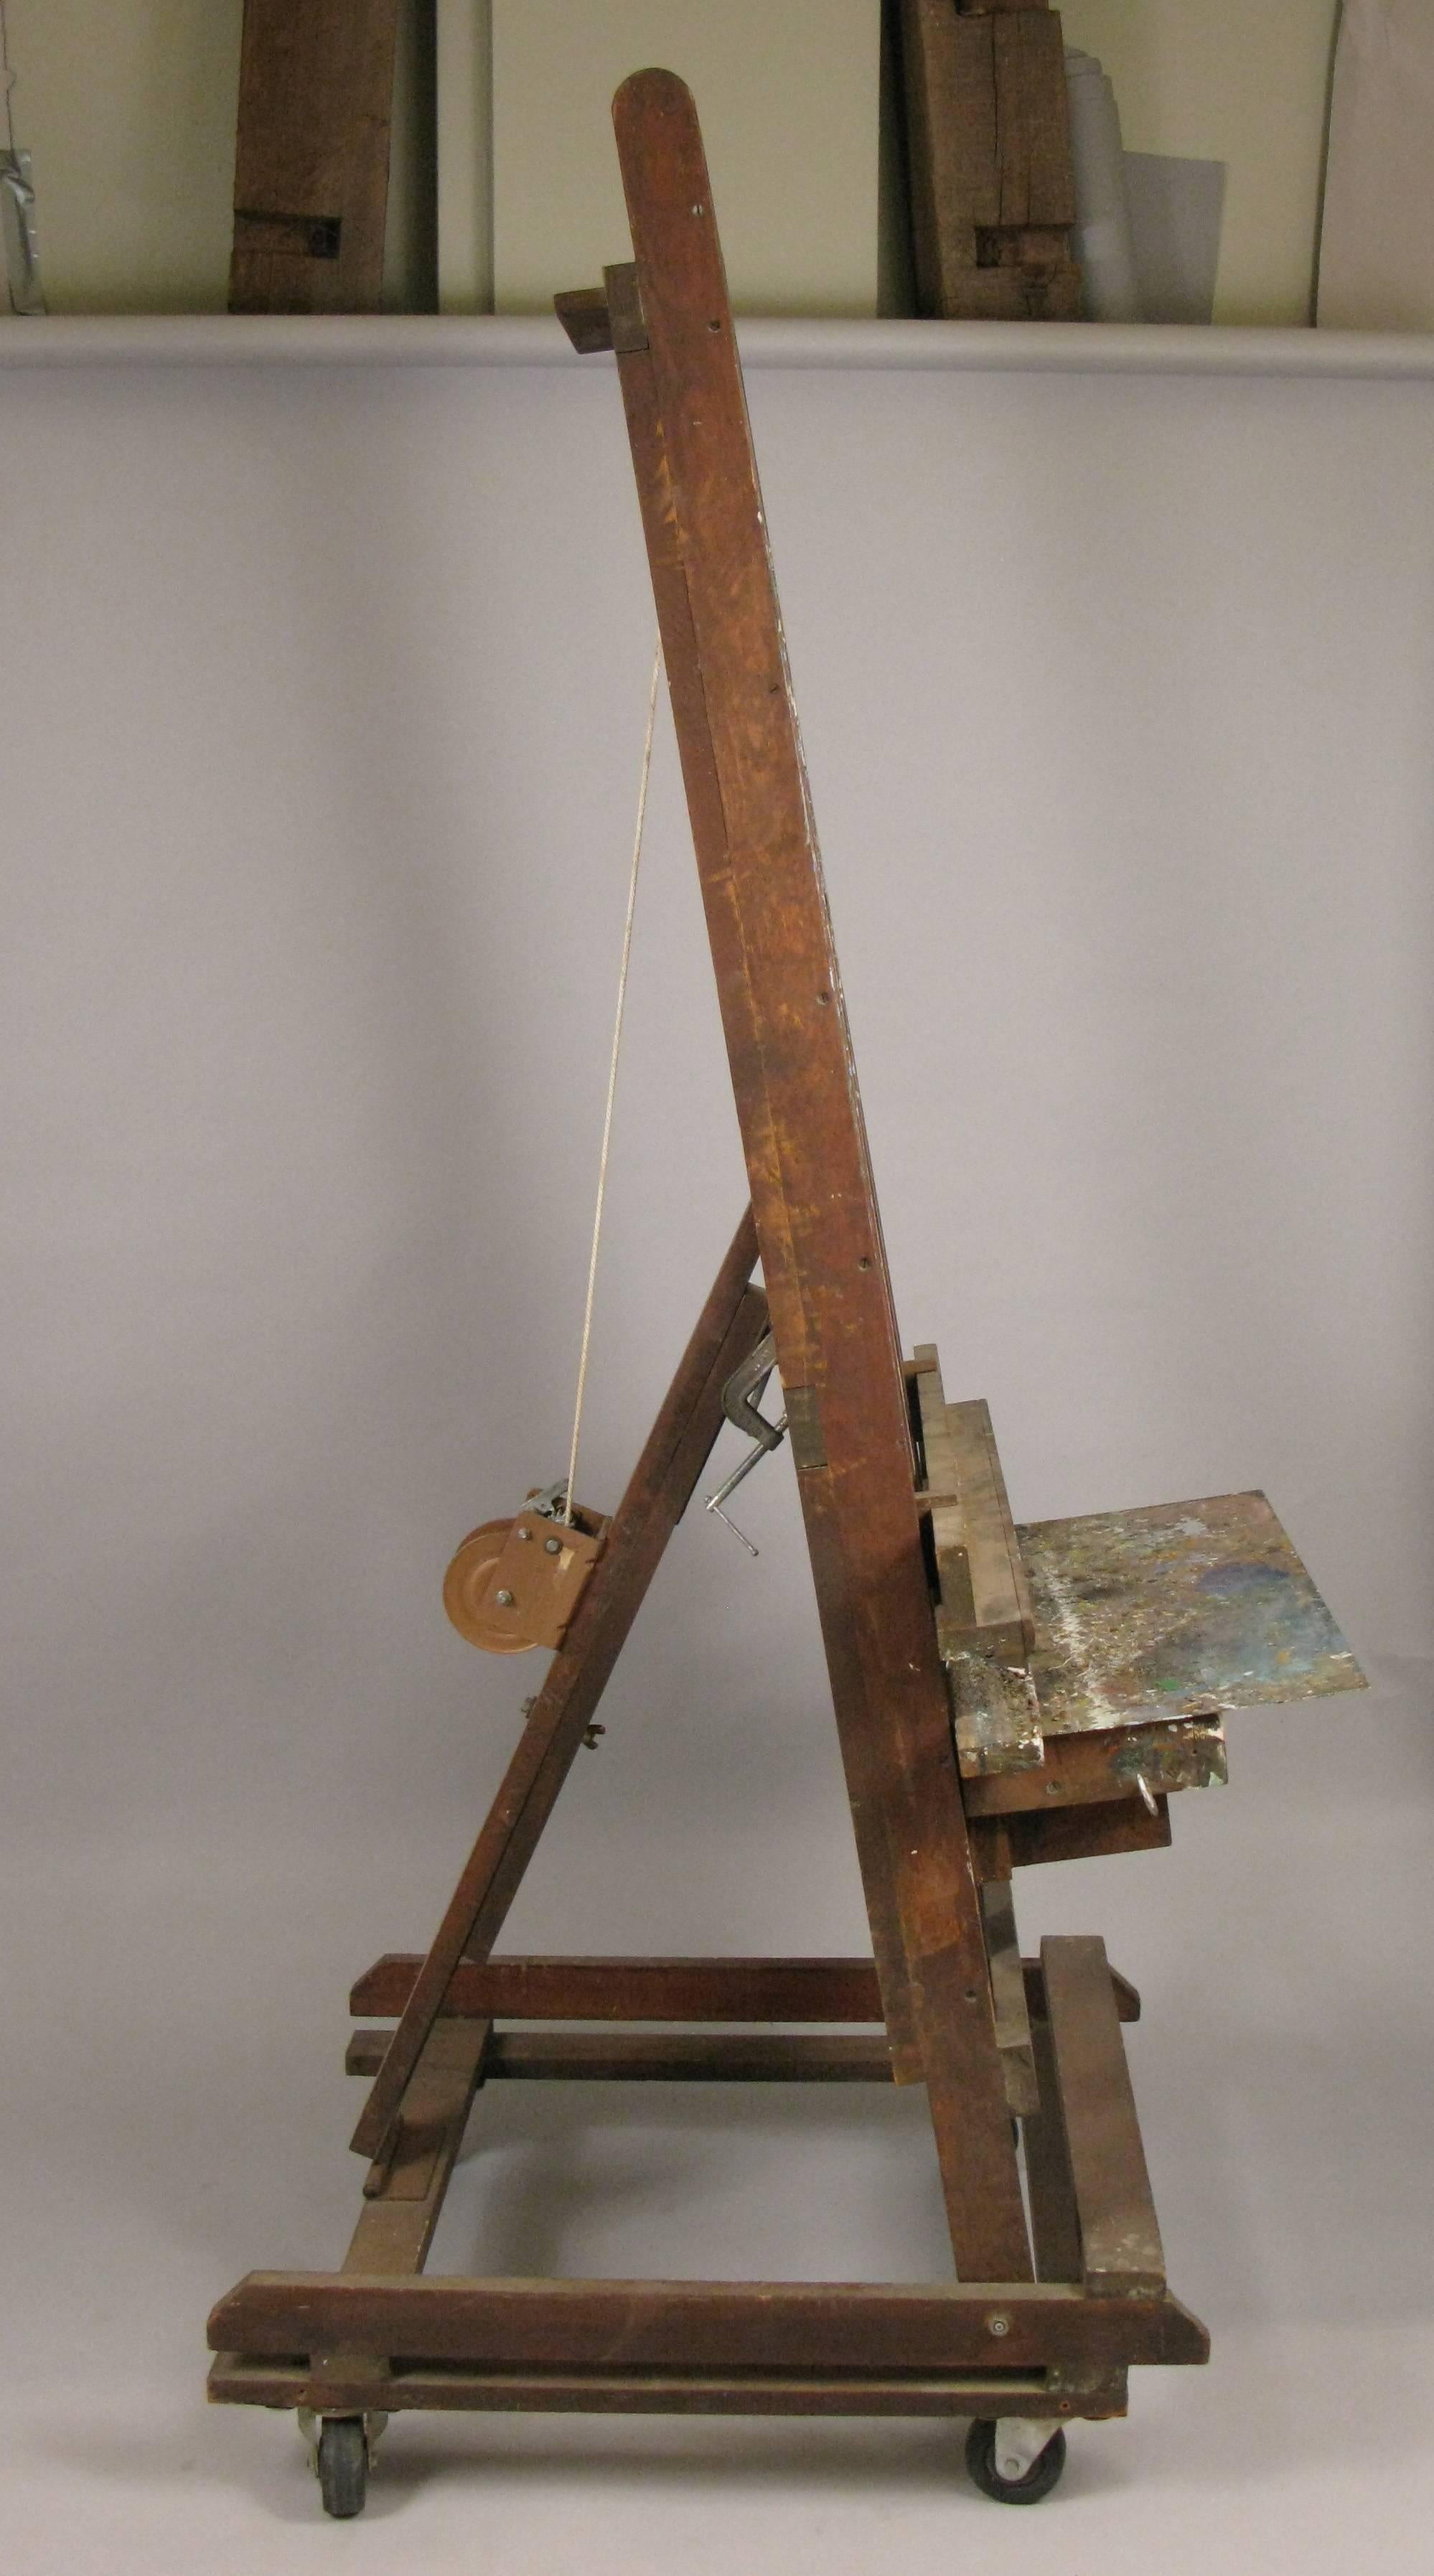 A very large-scale vintage 1950s adjustable artists easel, on wheels with a pulley and winch to raise or lower the large art shelf. In original condition with scattered paint.